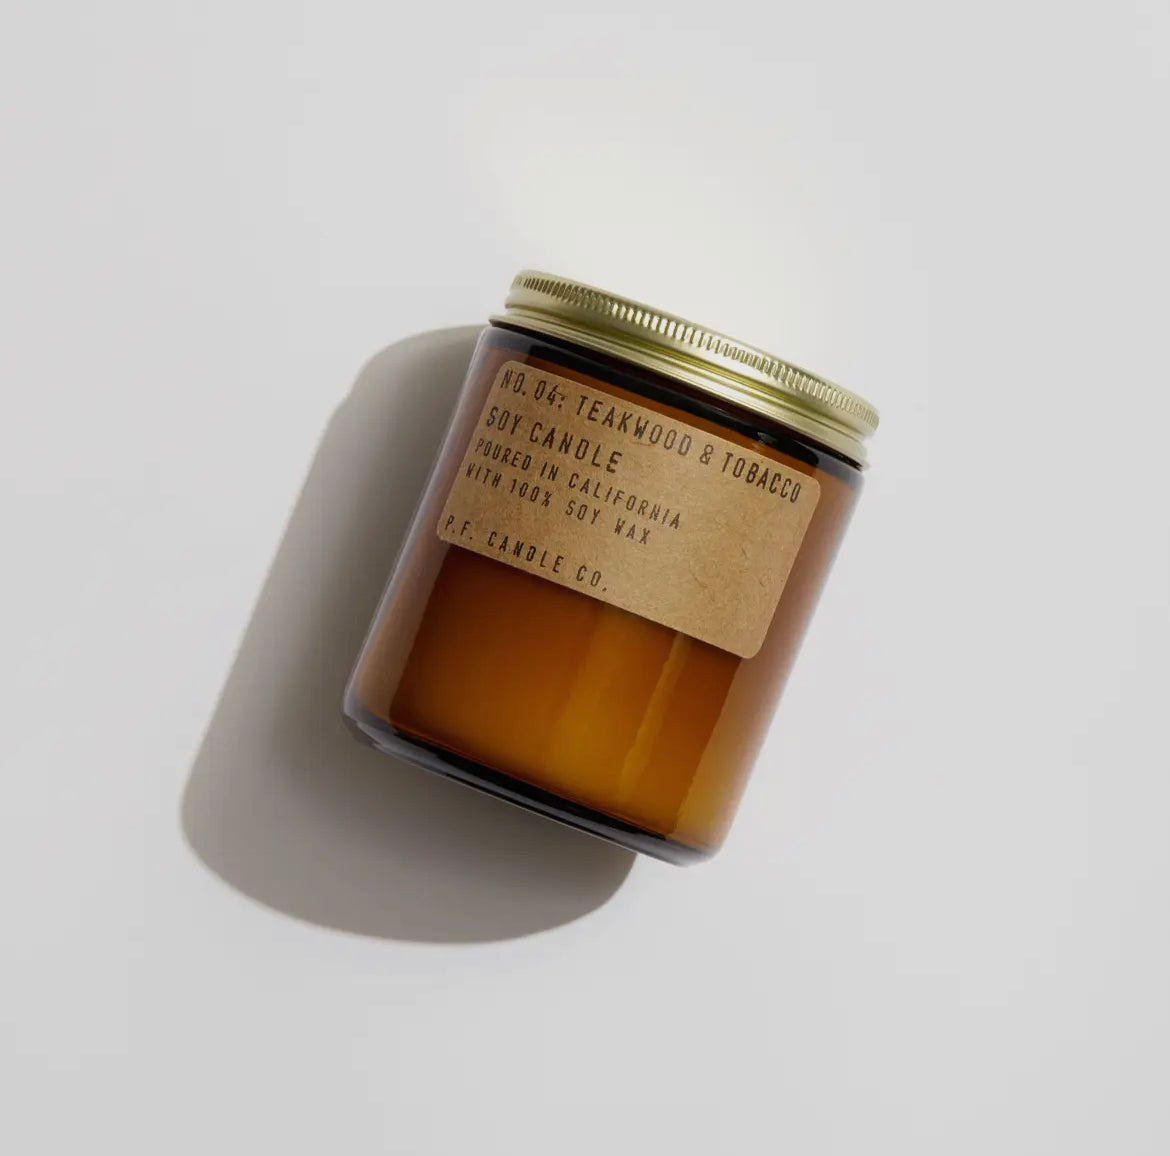 Teakwood + Tobacco Candle from PF Candle Co